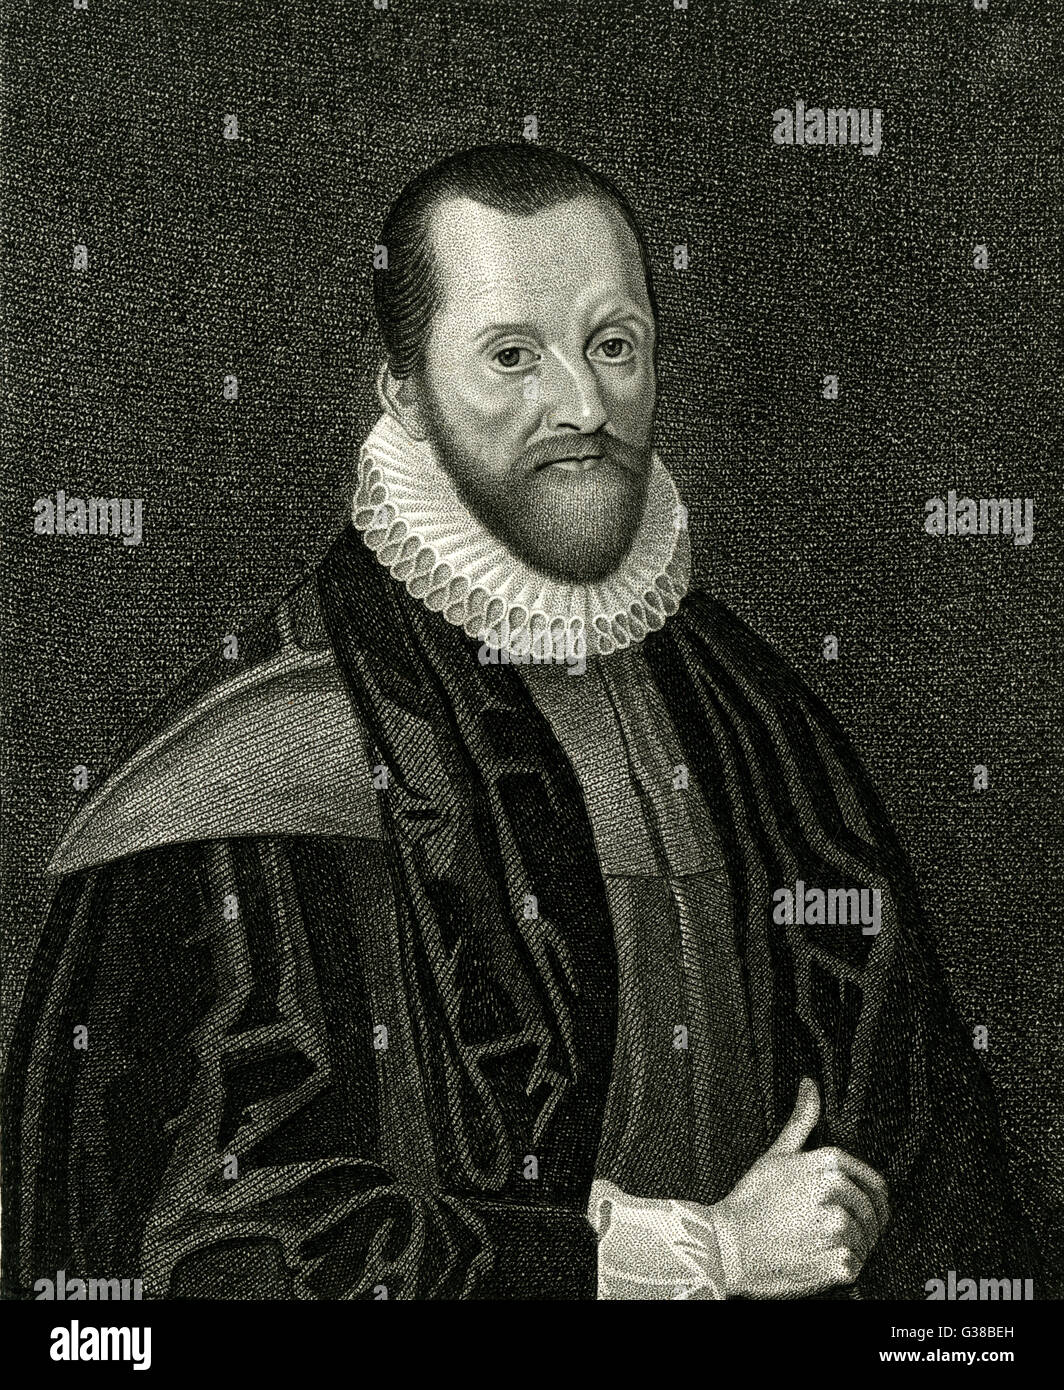 GEORGE HAKEWILL  Divine and author        Date: 1578 - 1649 Stock Photo